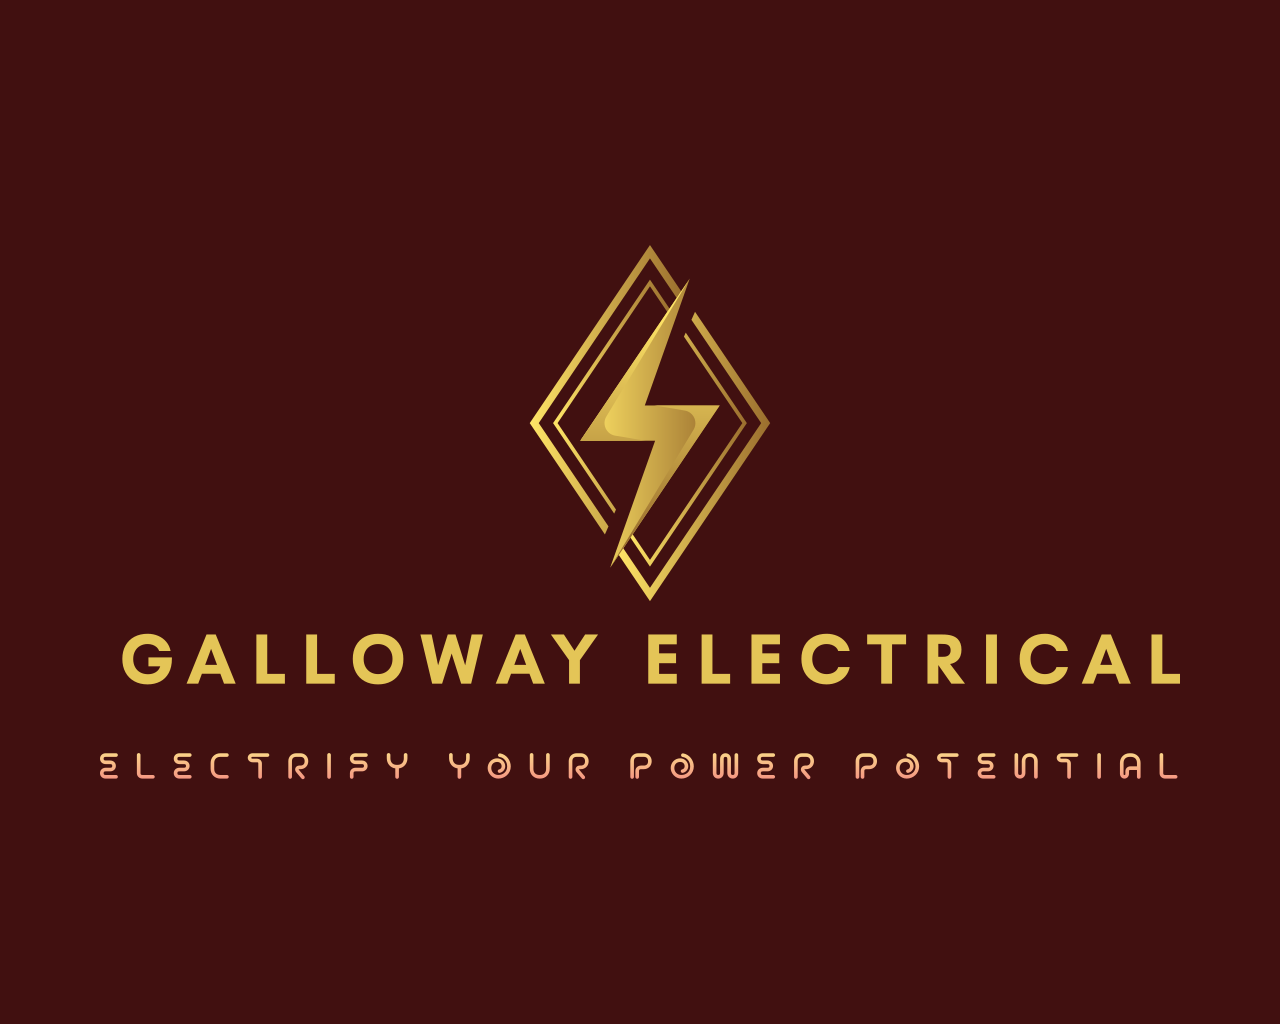 Galloway Electrical's logo